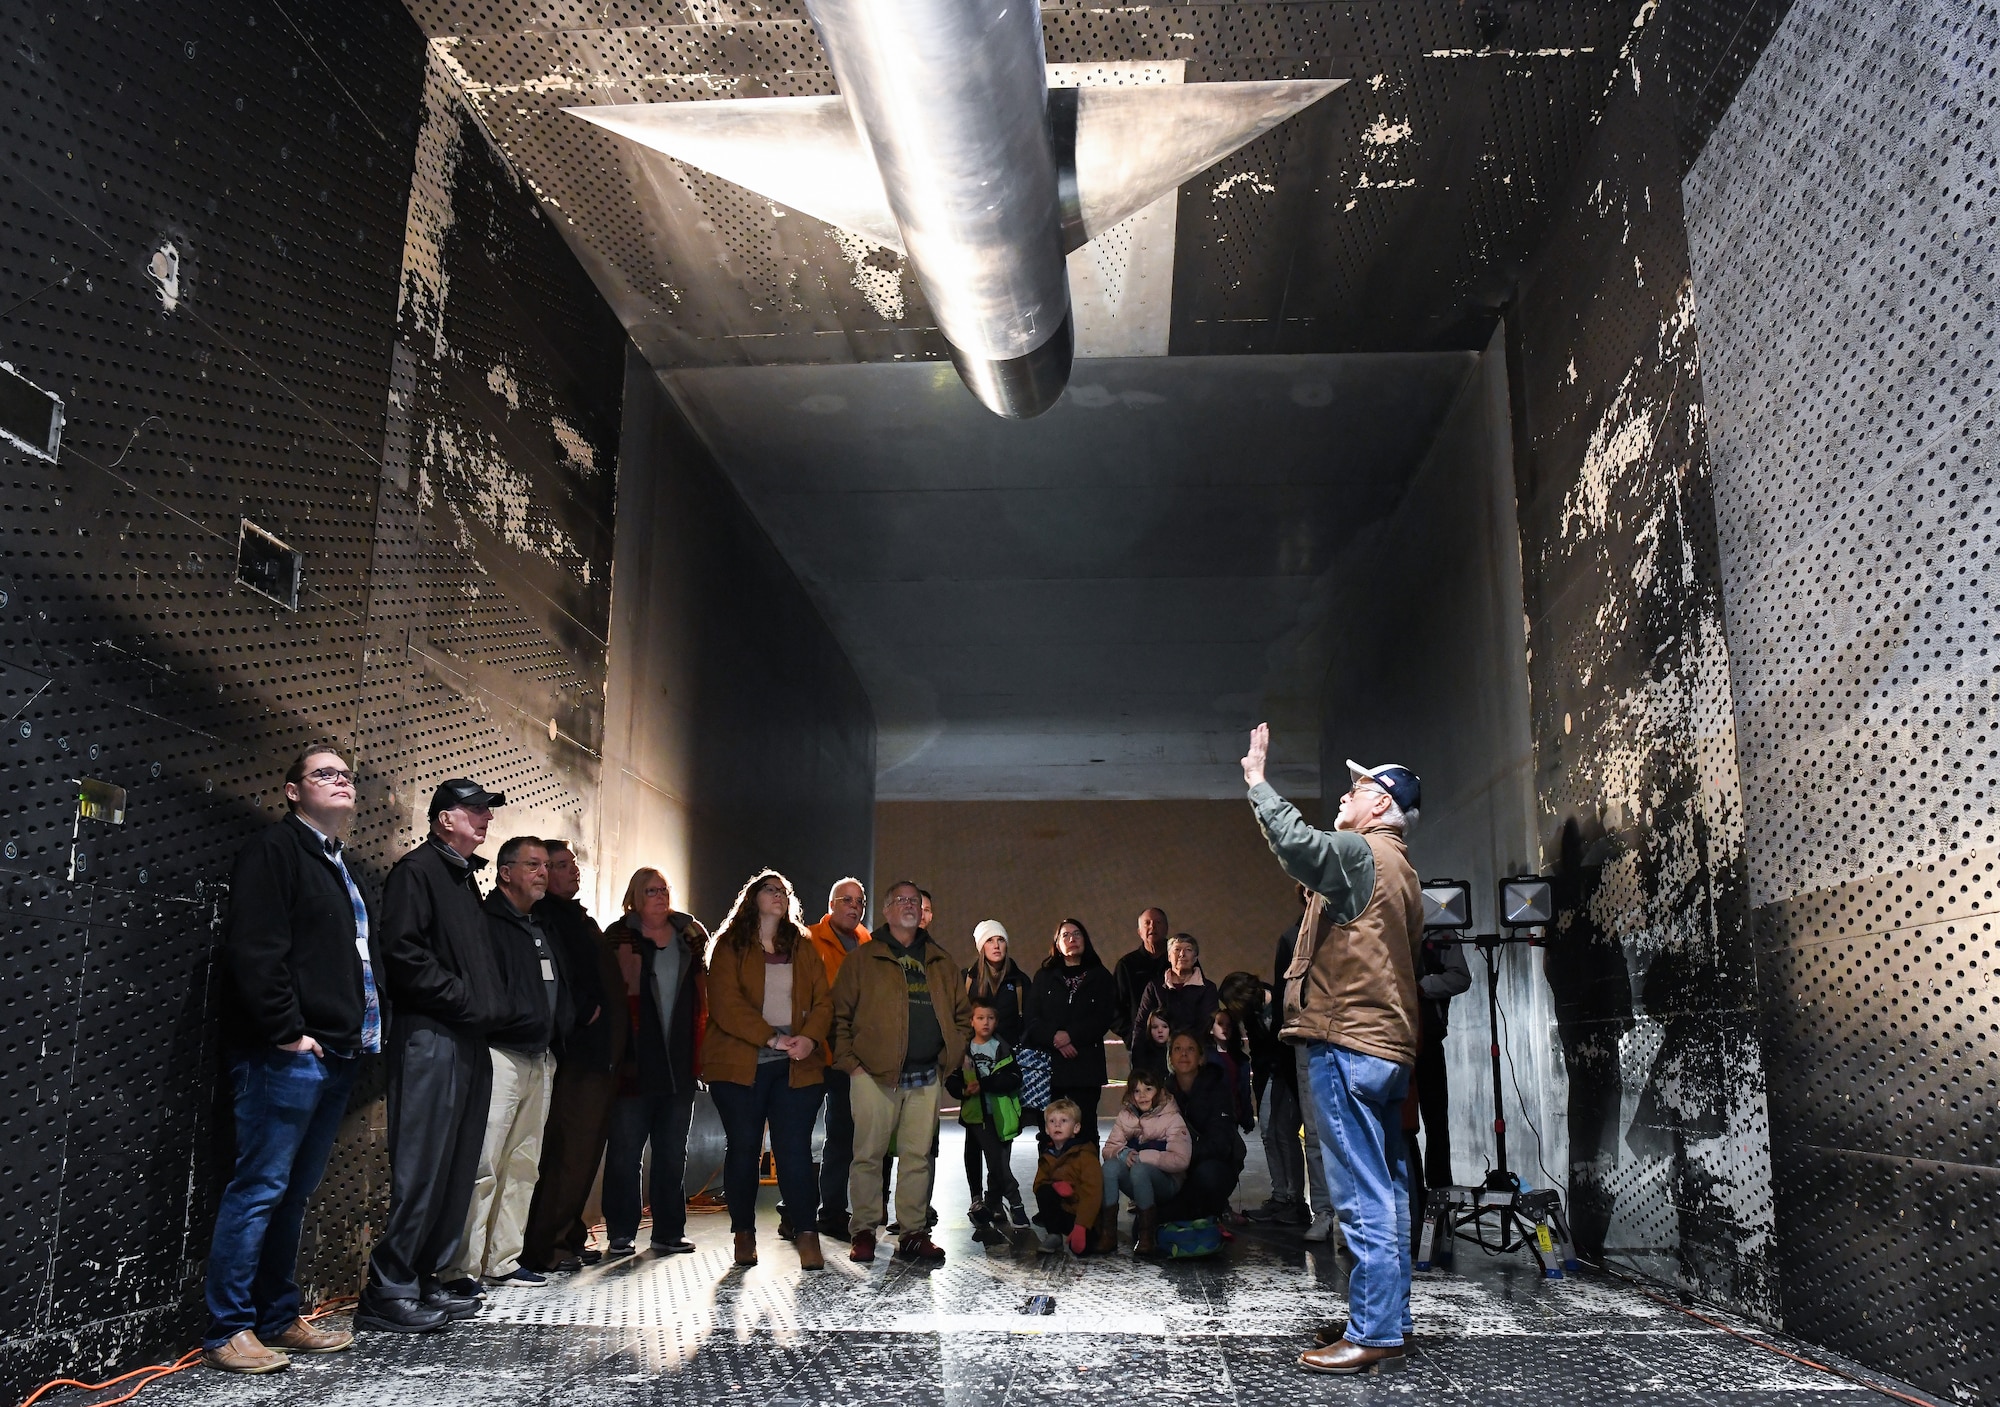 Man speaking to group of people standing inside a wind tunnel